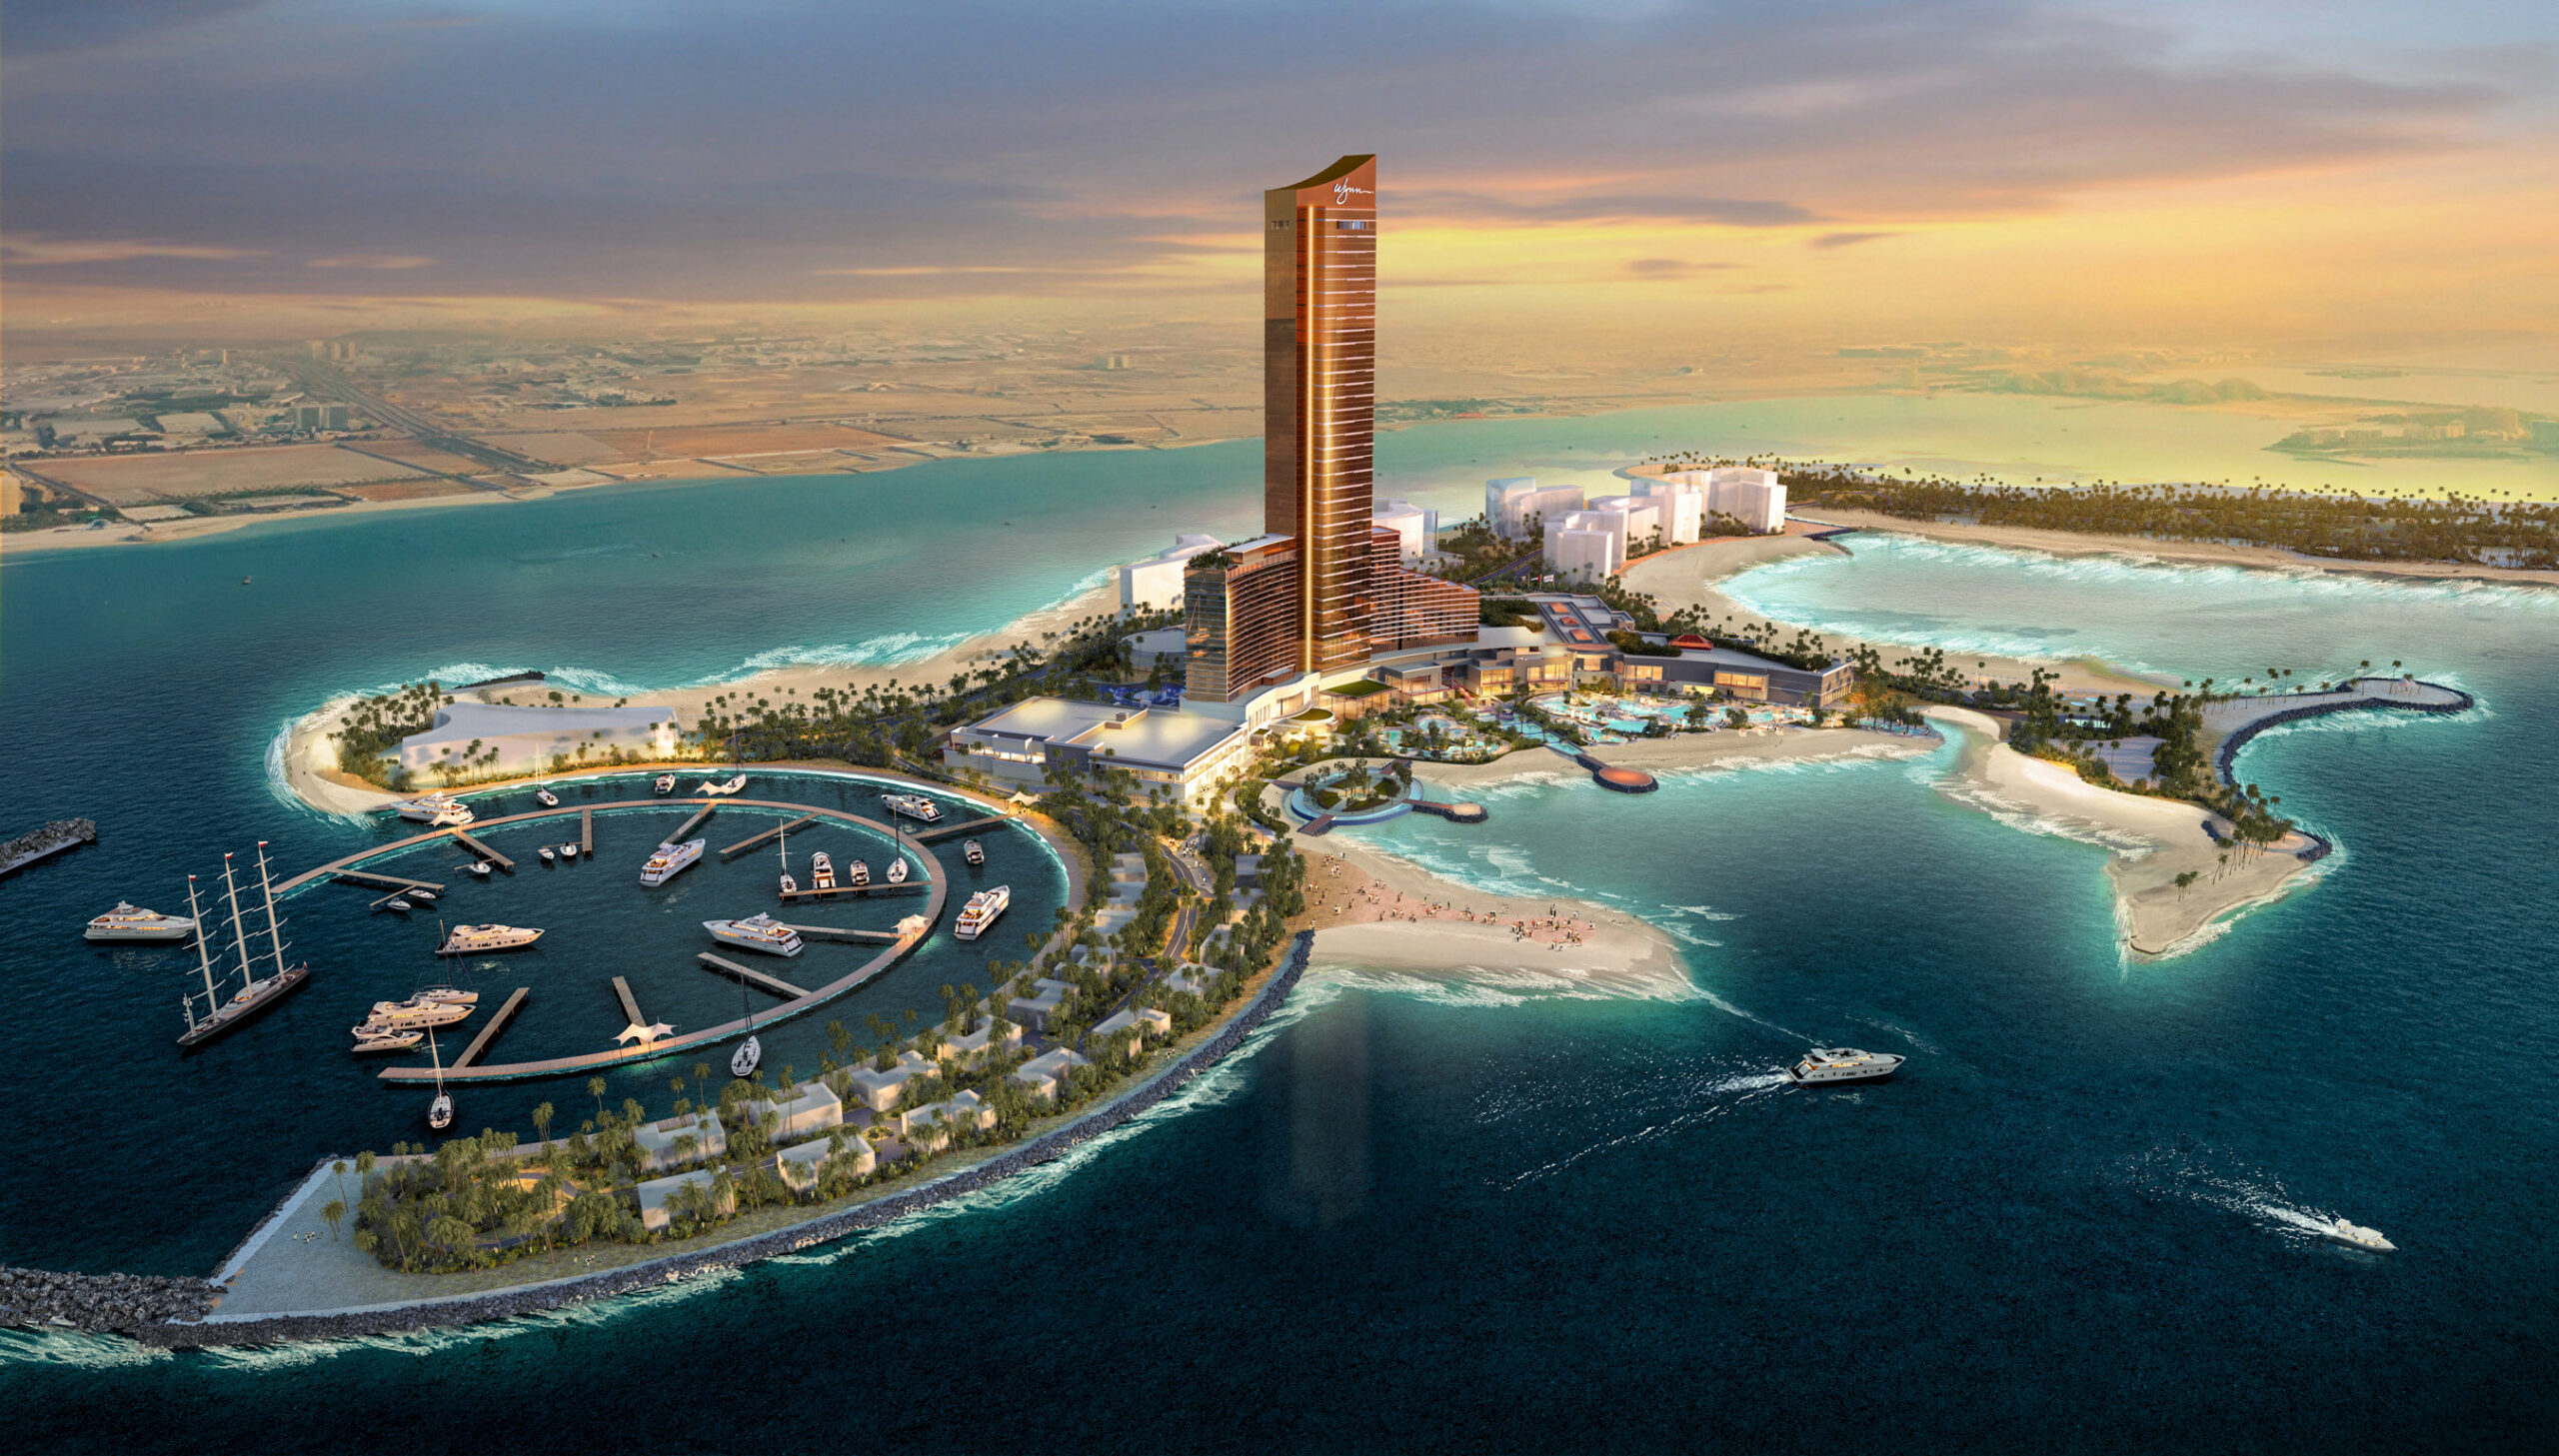 Rendering provides a view of the planned $3.9 billion Wynn Al Marjan Island in the United Arab Emirates. The project is expected to open in 2027. (Photo courtesy of Wynn Resorts).